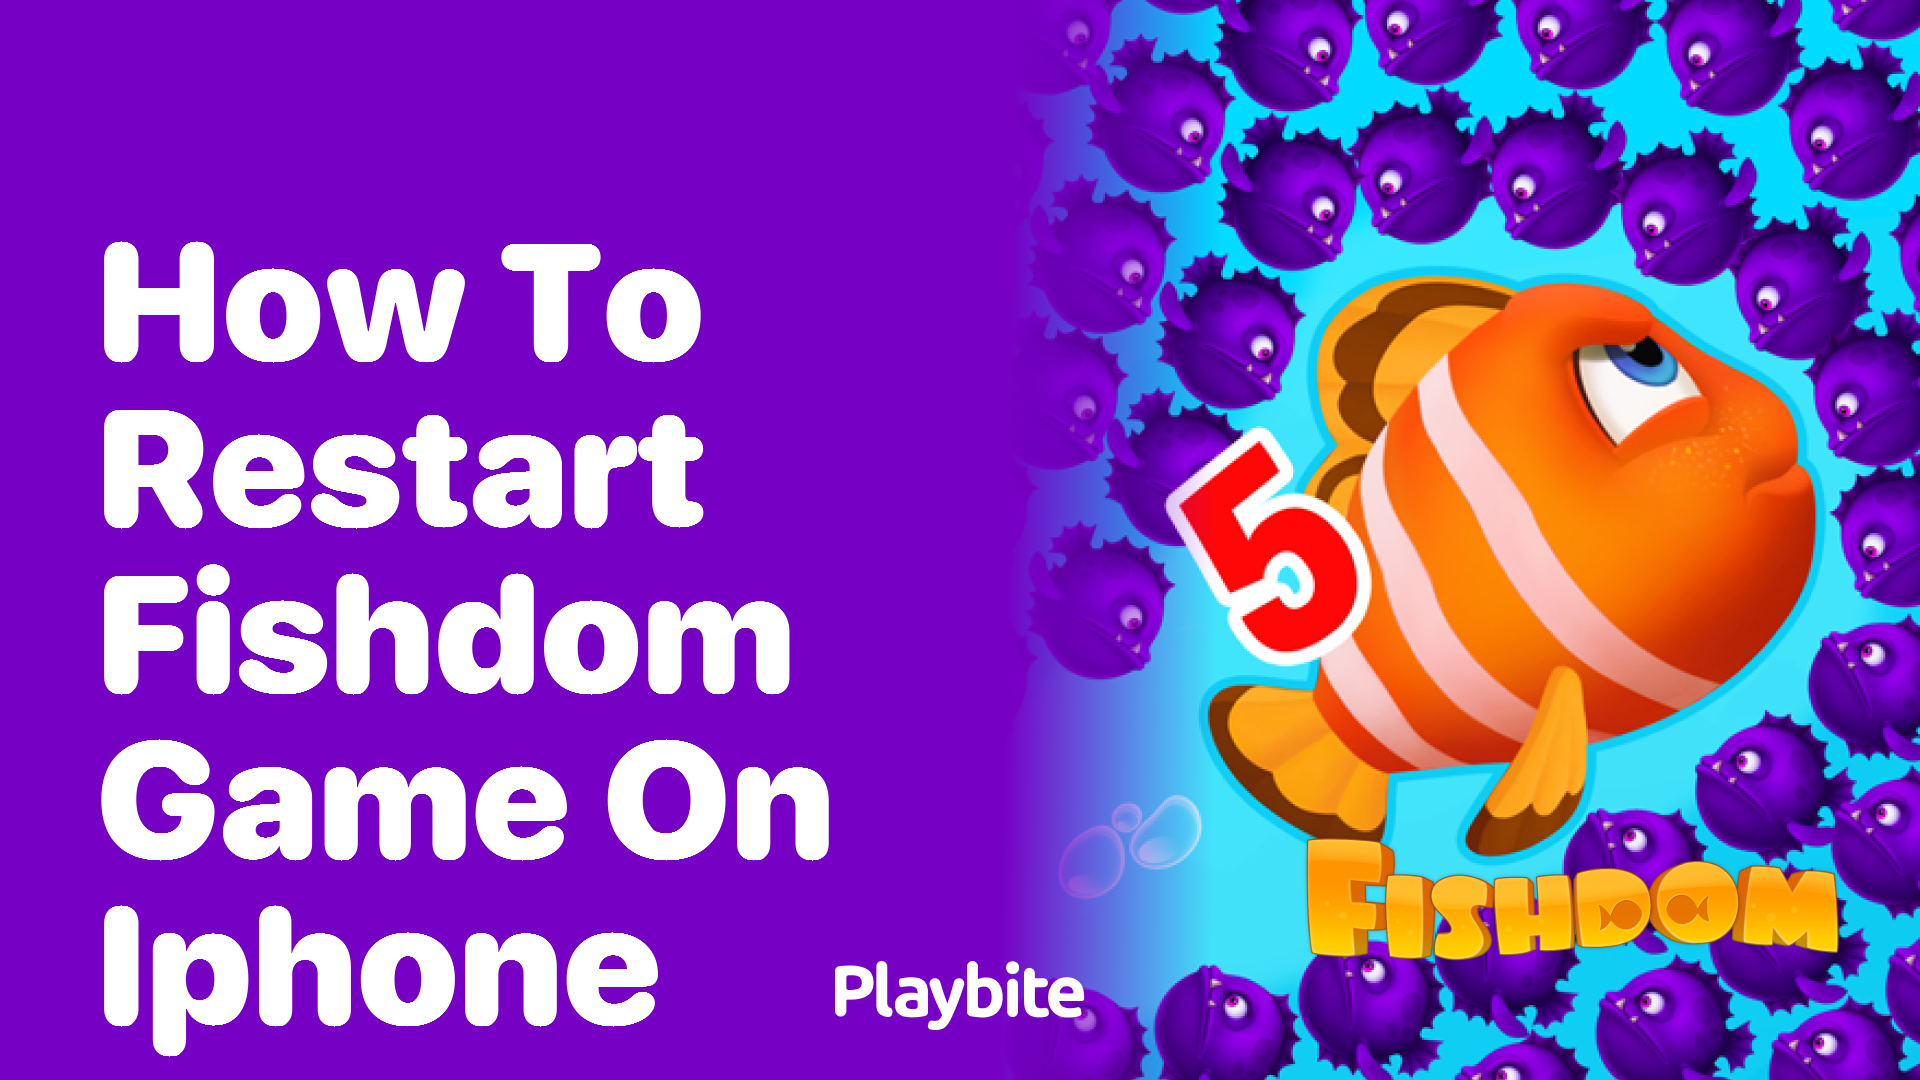 How to Restart Fishdom Game on iPhone: A Simple Guide